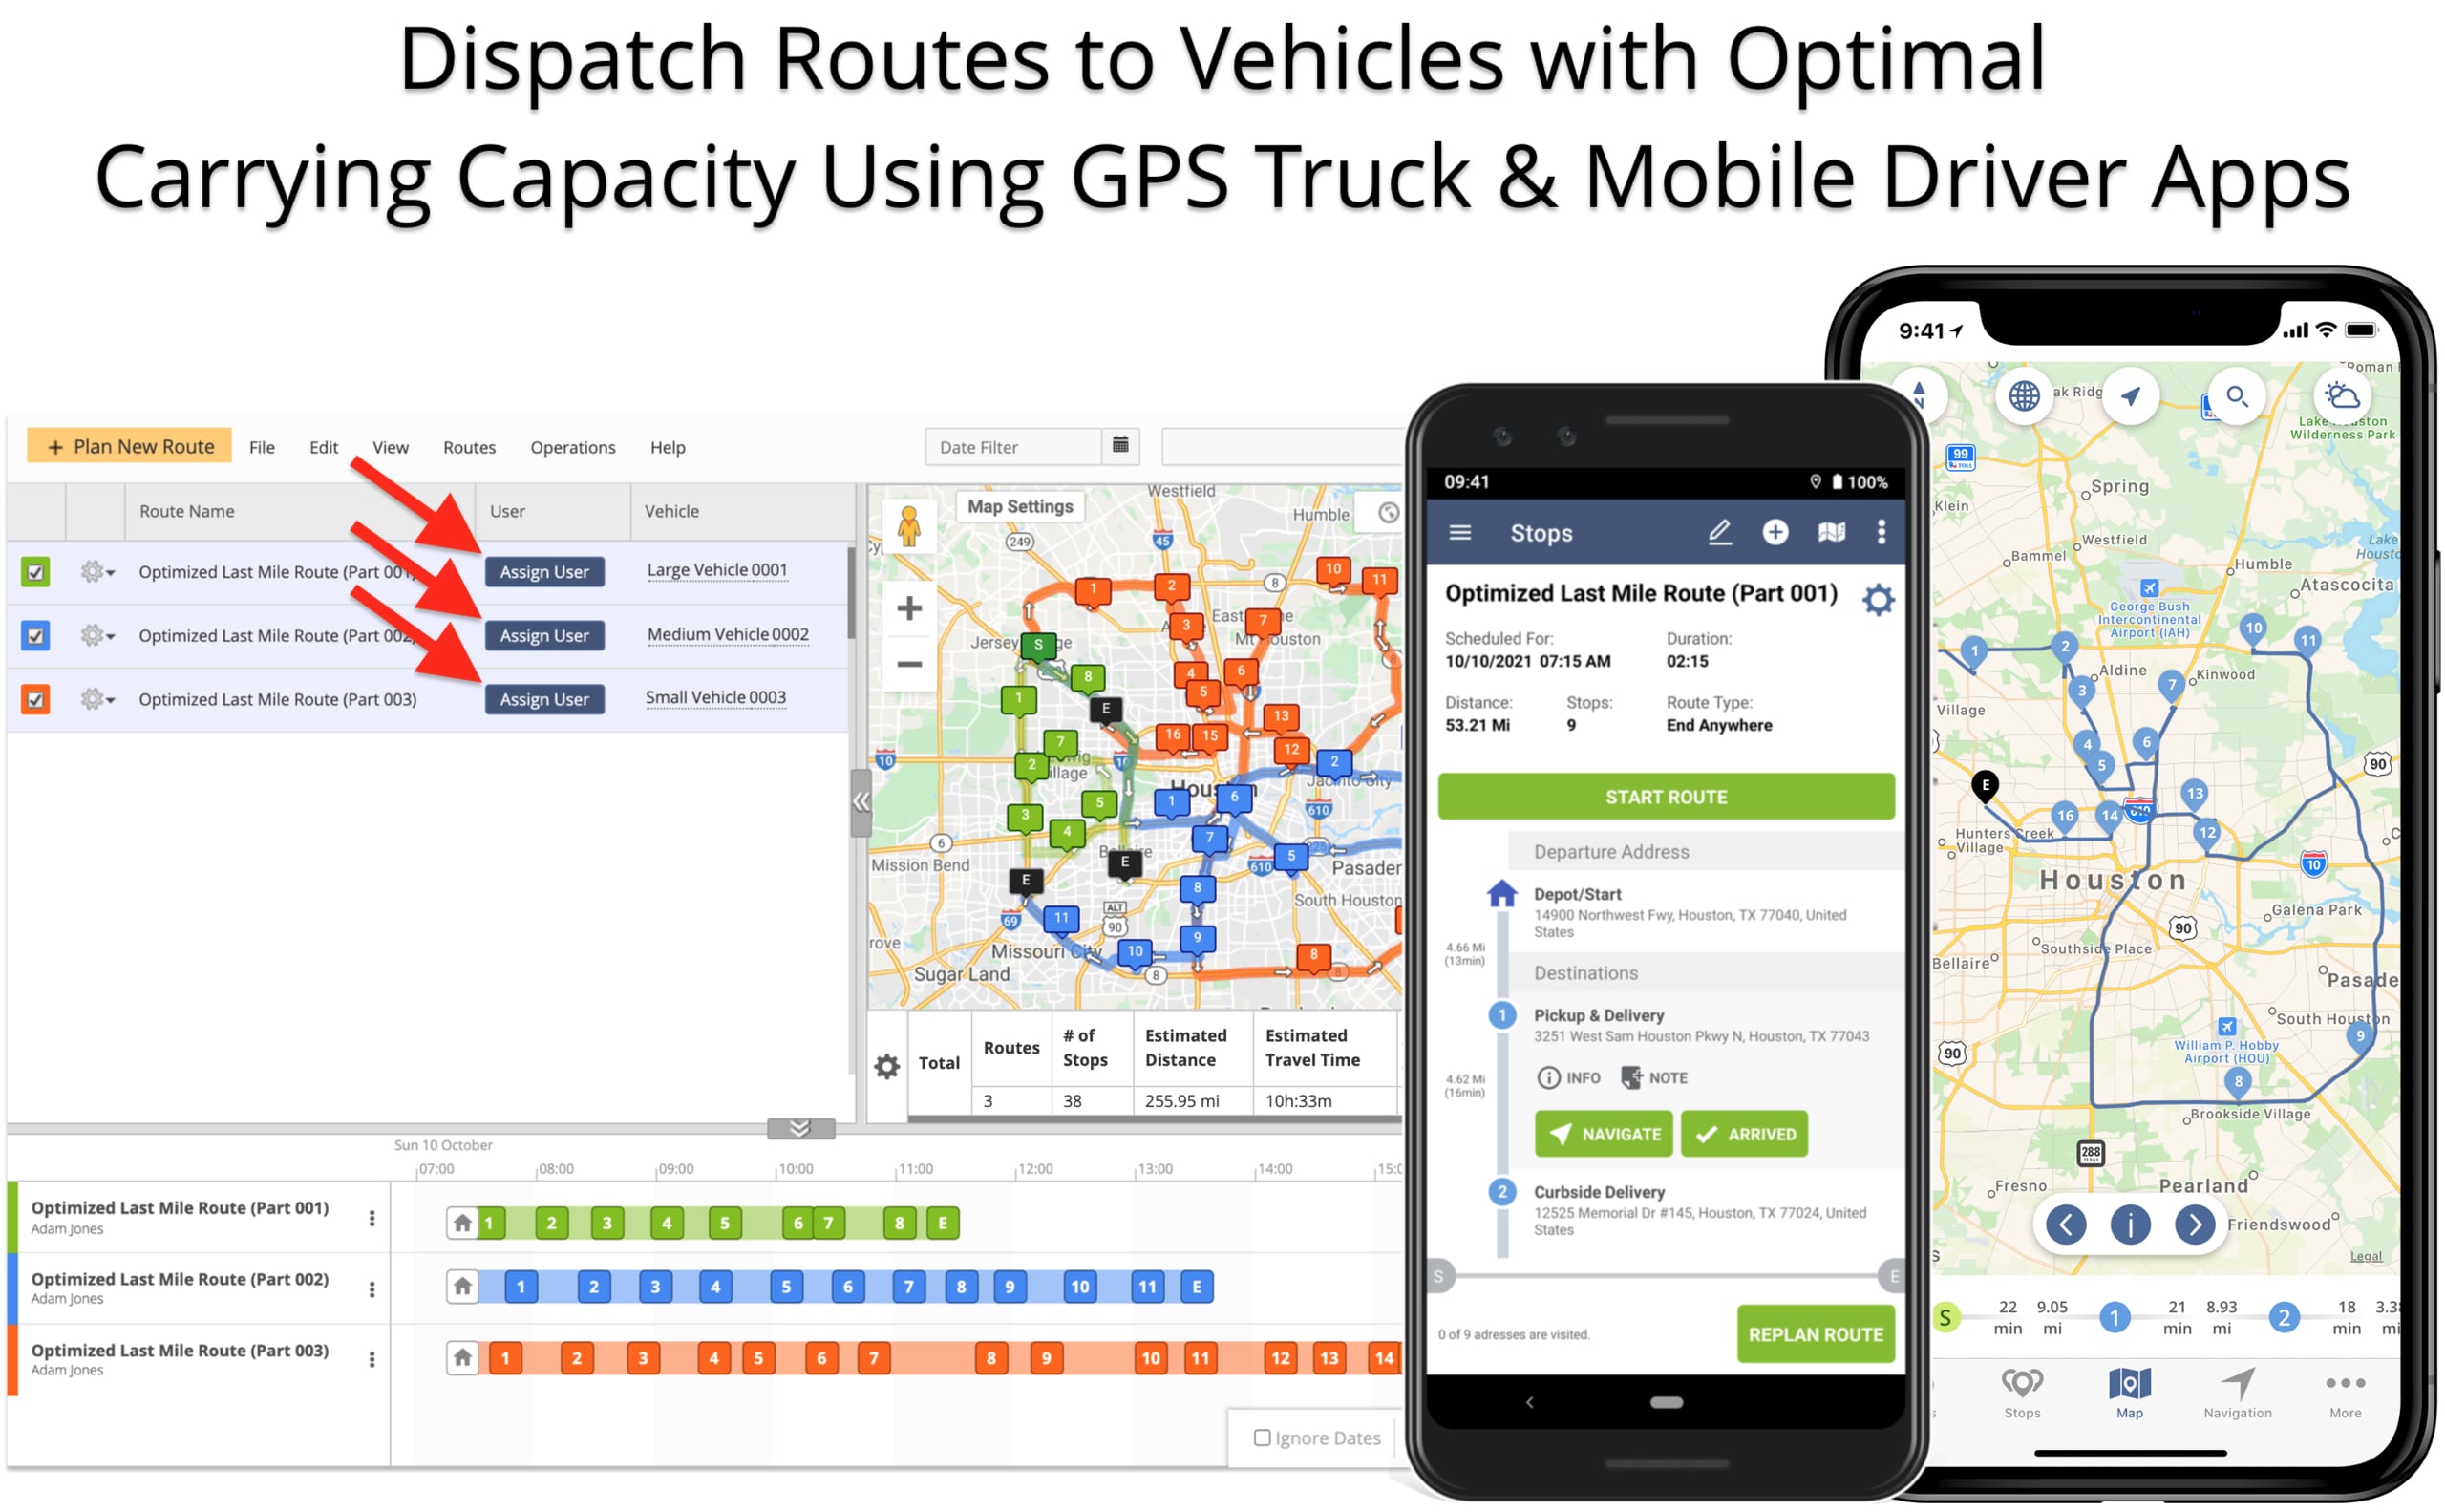 Dispatch delivery and pickup routes to a mixed fleet of vehicles with different load capacities.